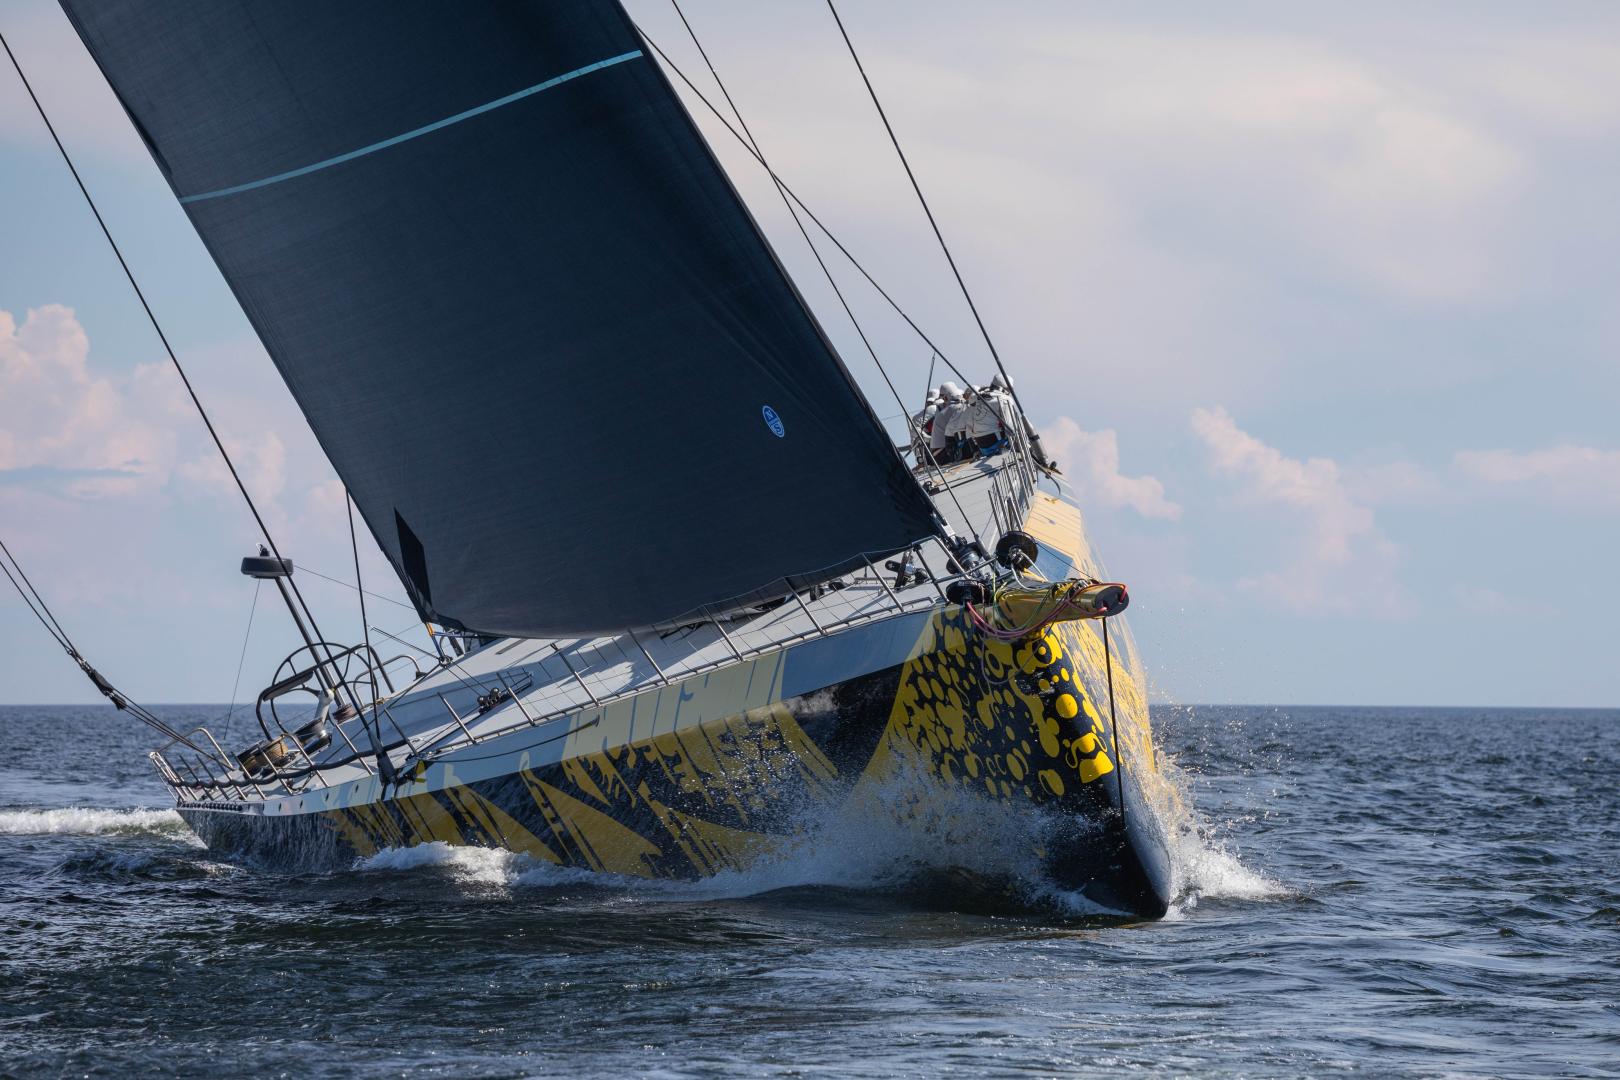 An impressive line up of monohull Line Honours Contenders